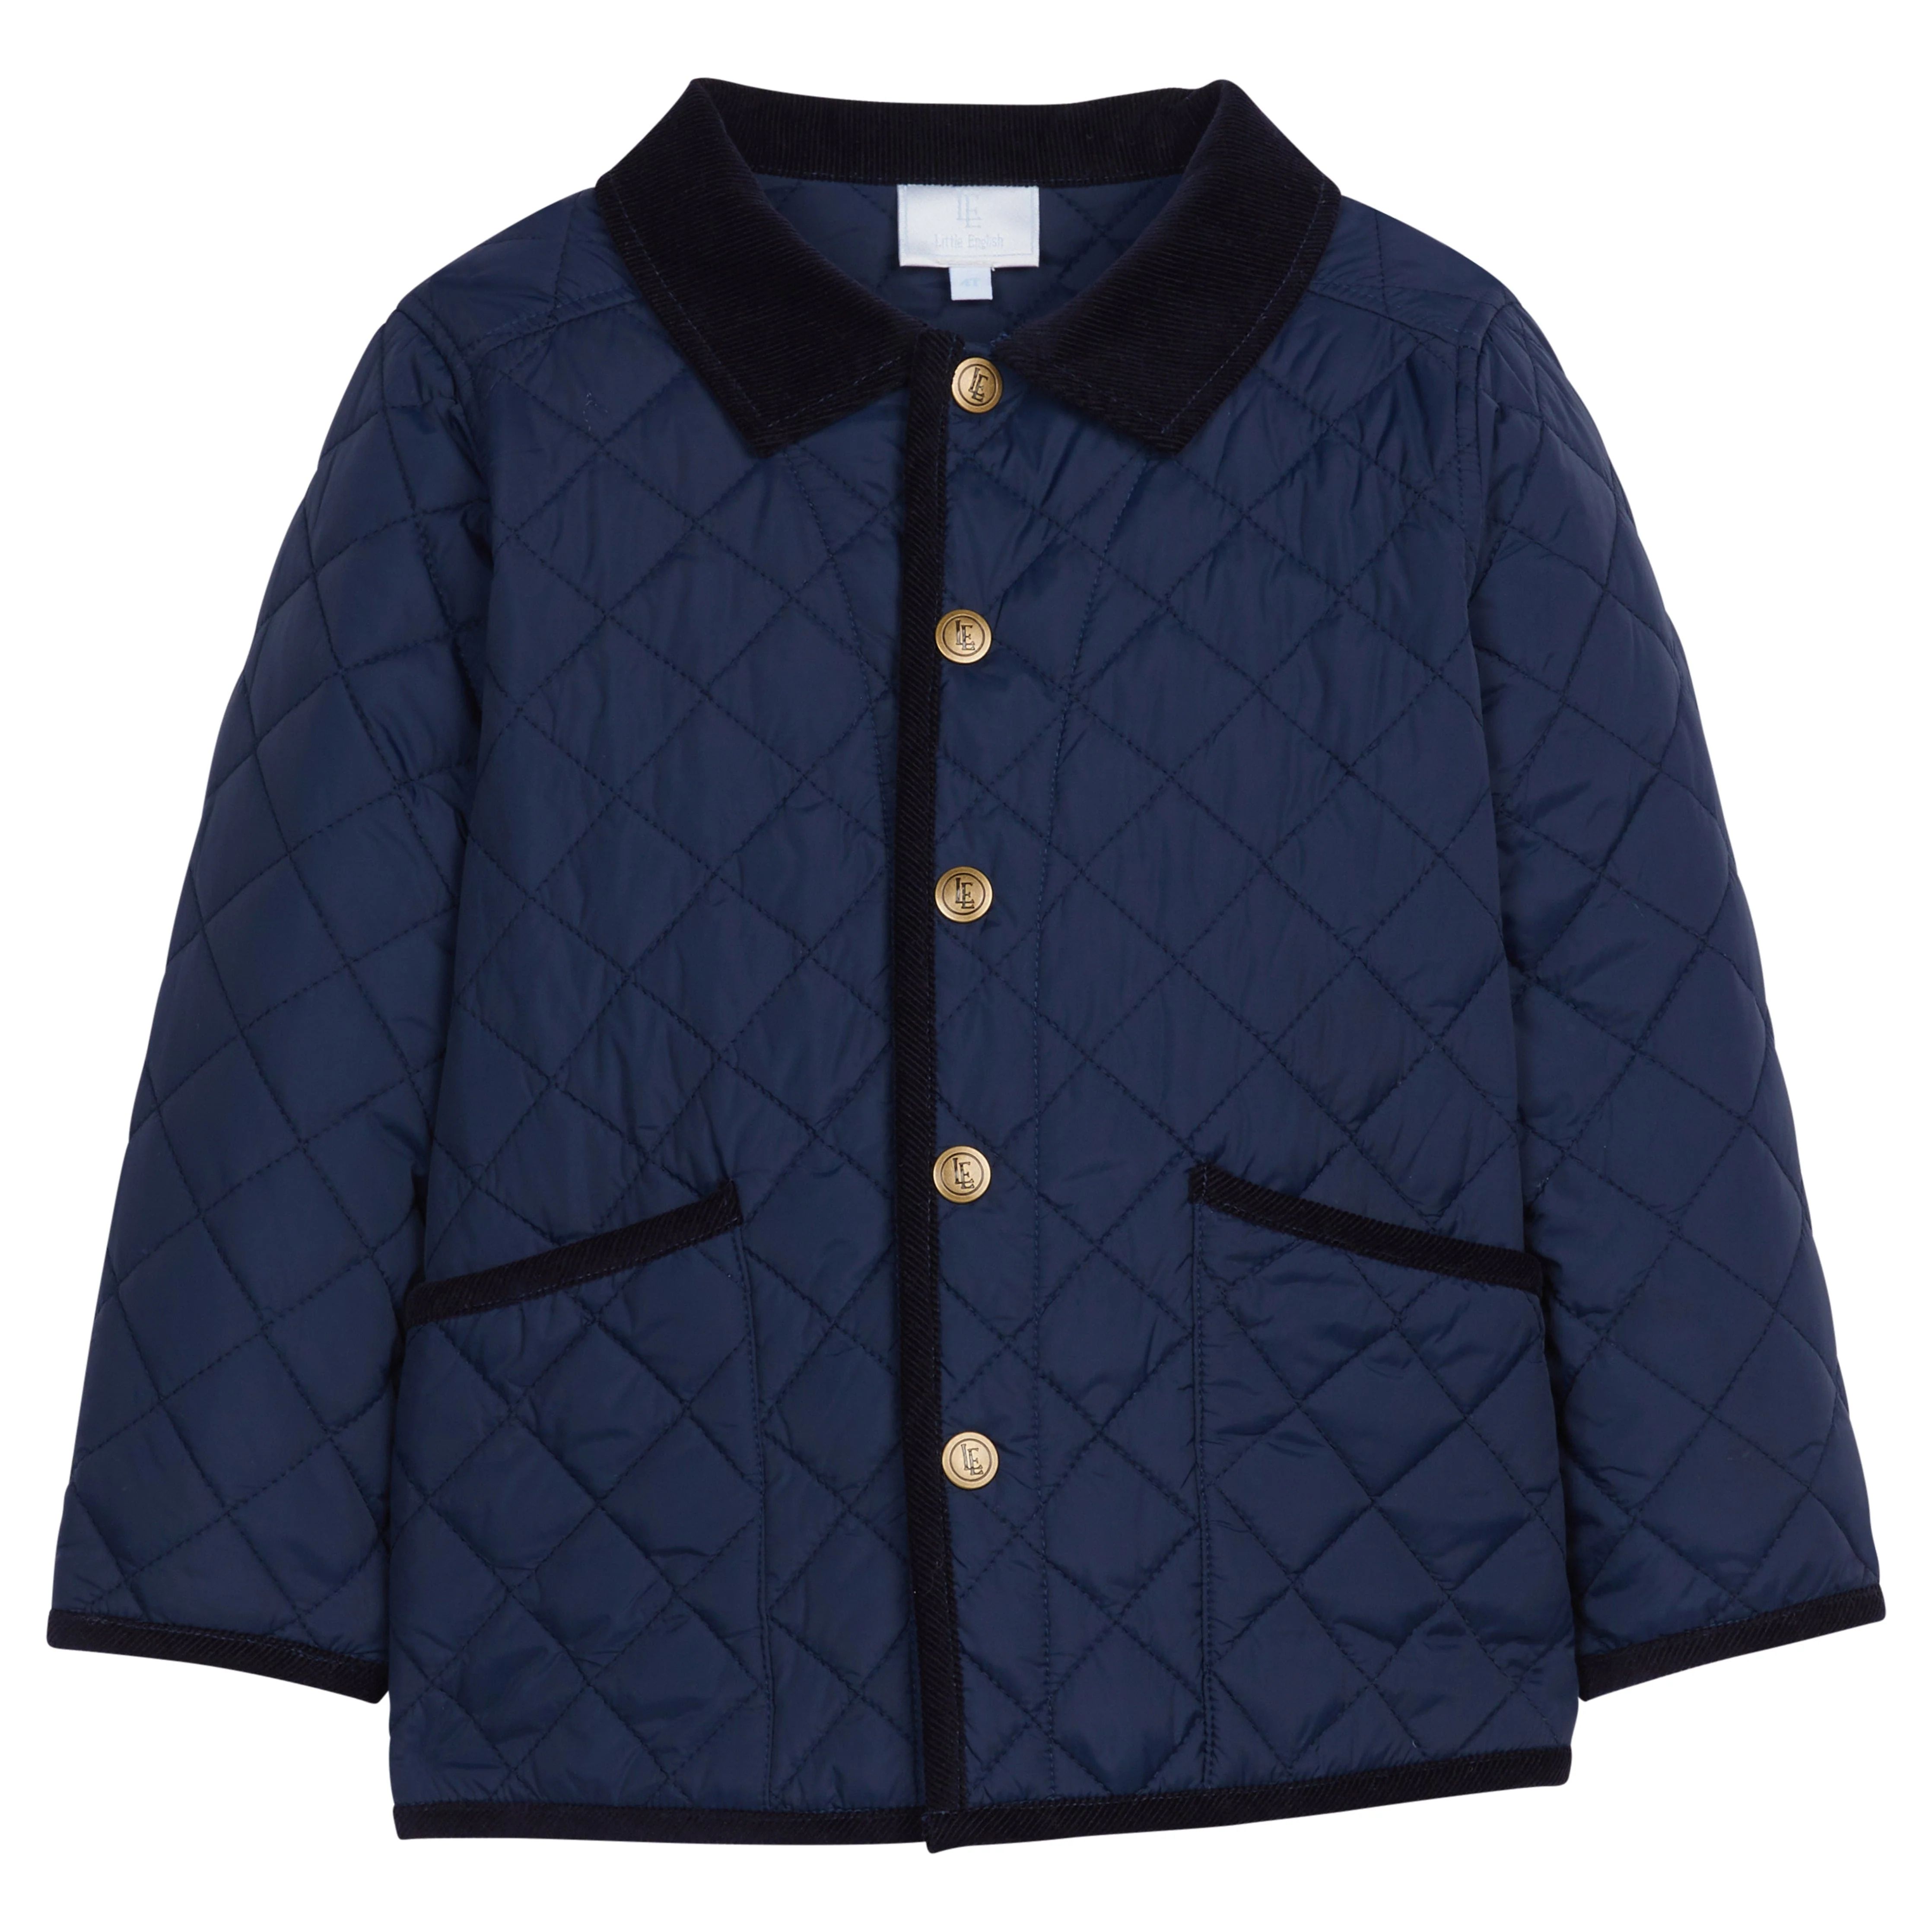 Navy Blue Quilted Jacket - Preppy Fall Outerwear for Kids | Little English